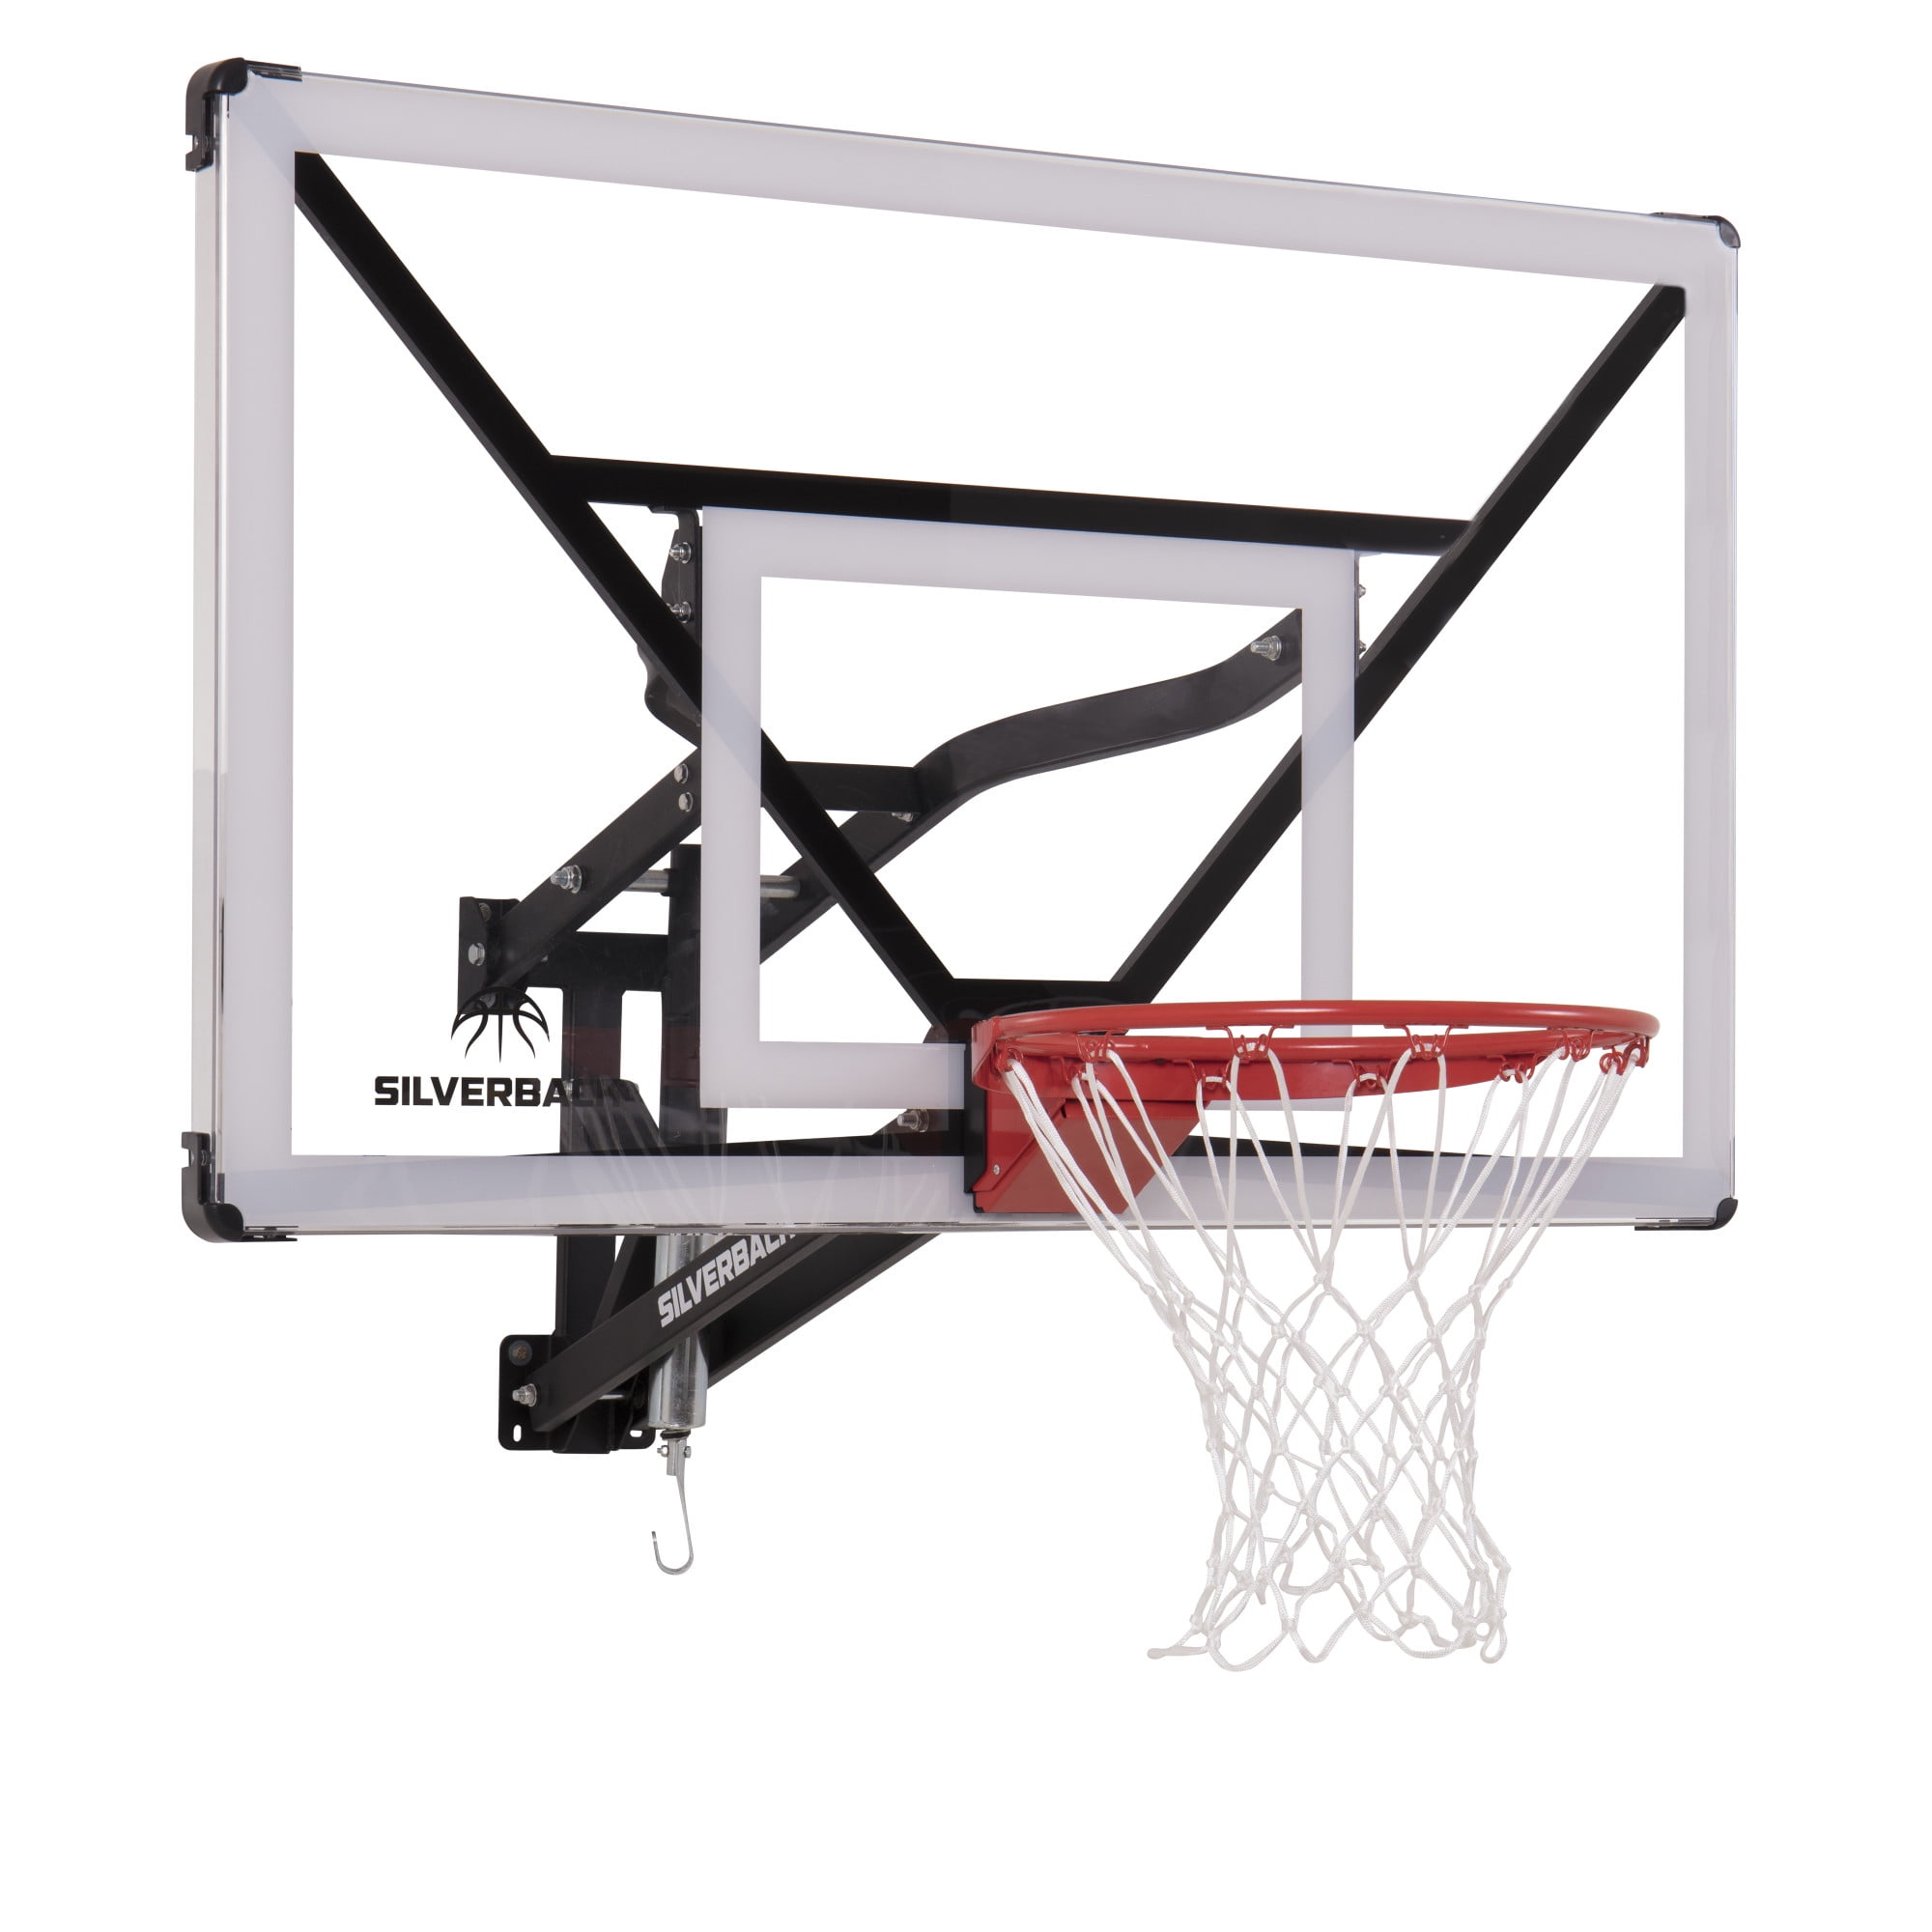 Silverback NXT 54" Wall Mounted Adjustable-Height Basketball Hoop with Quick Play Design